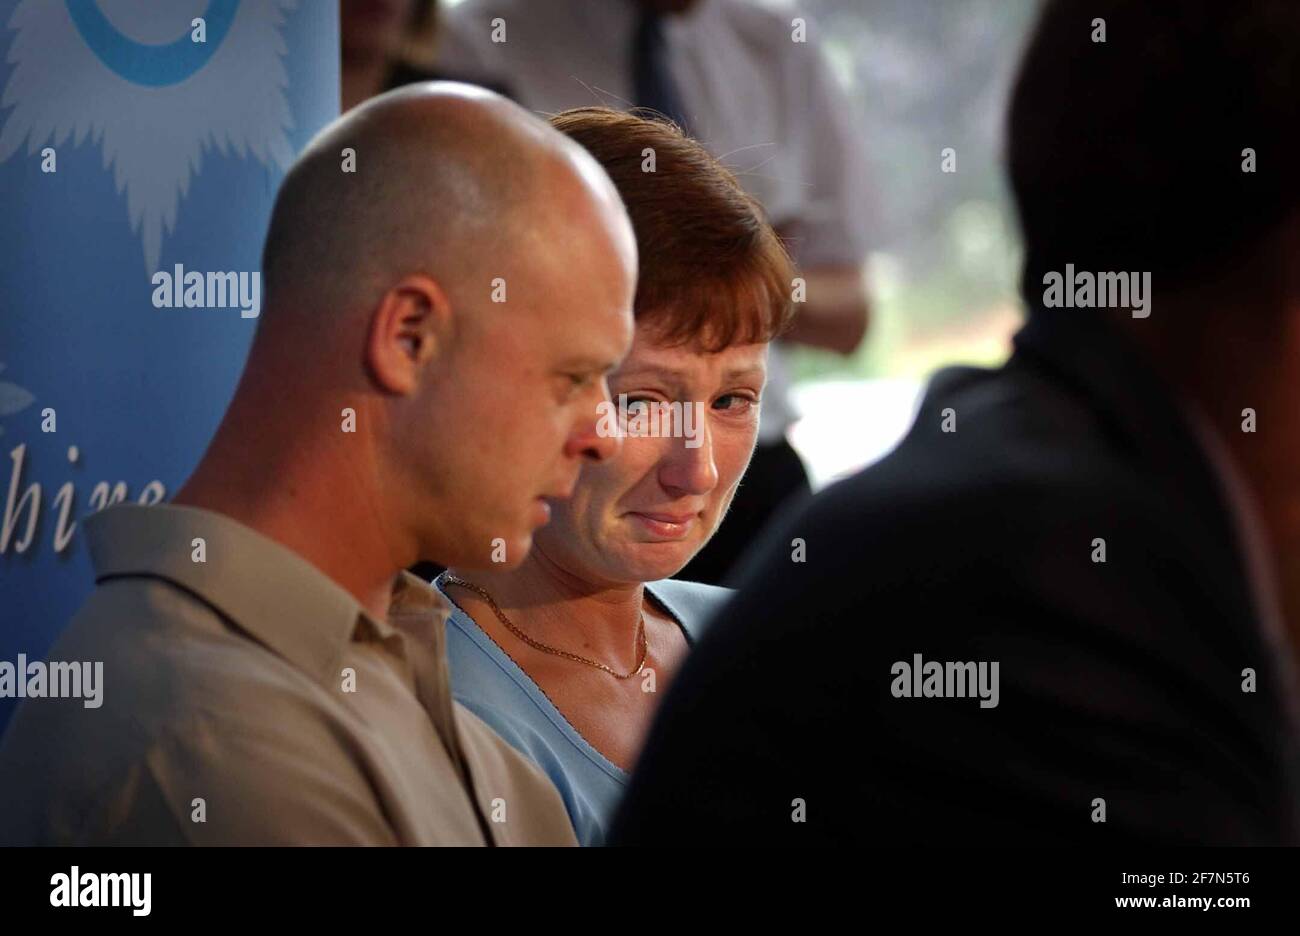 THE PARENTS OF HOLLY WELLS,KEVIN AND NICOLA AT A PRESS CONFERENCE IN SOHAM ON THE DISSAPEARANCE OF THEIR DAUGHTER AND A FRIEND. 6/8/02 PILSTON Stock Photo